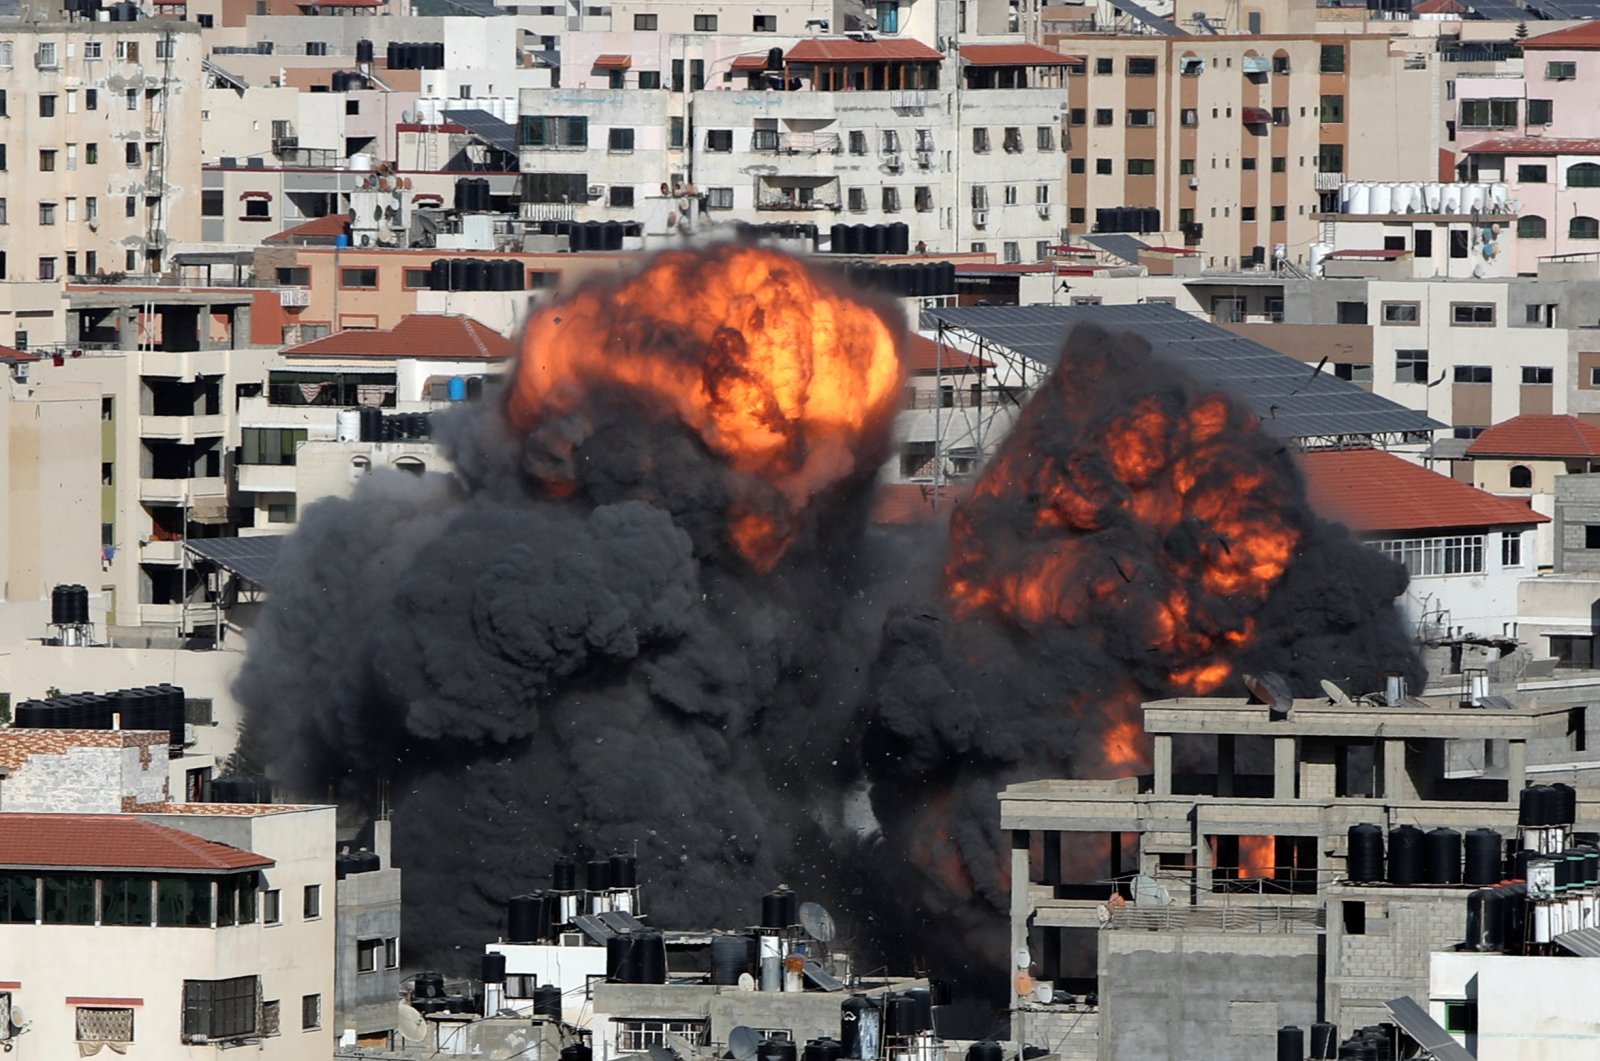 Smoke and flames rise during an Israeli airstrike on Gaza City, Palestine, May 14, 2021. (Reuters Photo)